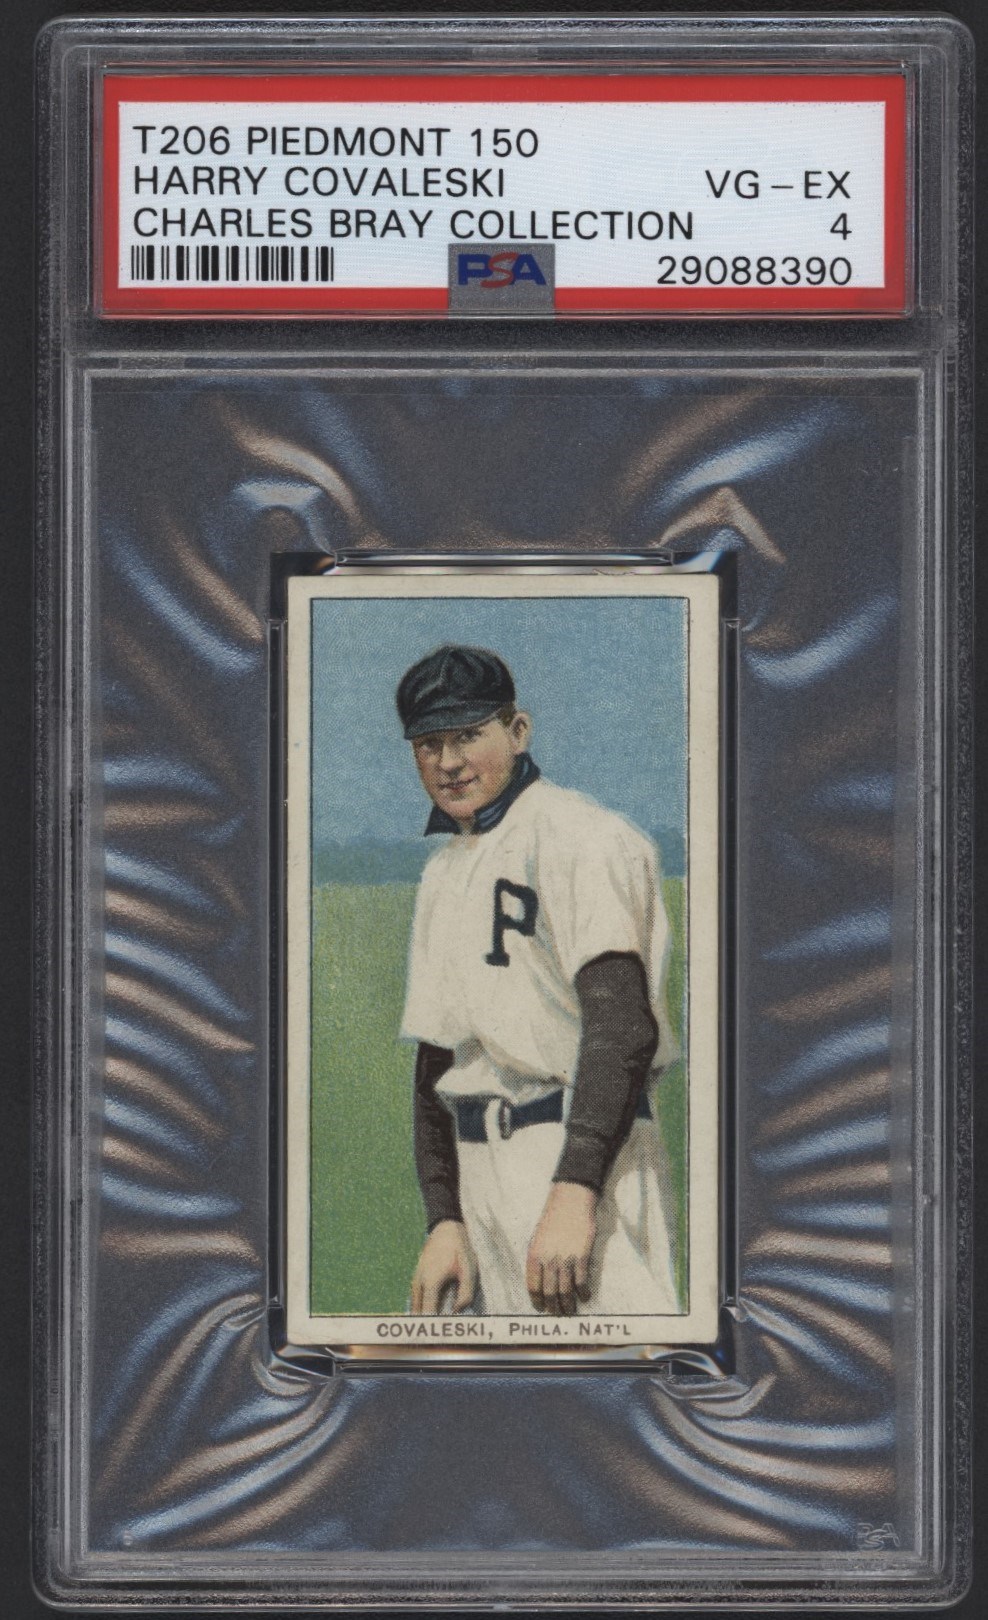 T206 Piedmont 150 Harry Covaleski PSA 4 From the Charles Bray Collection